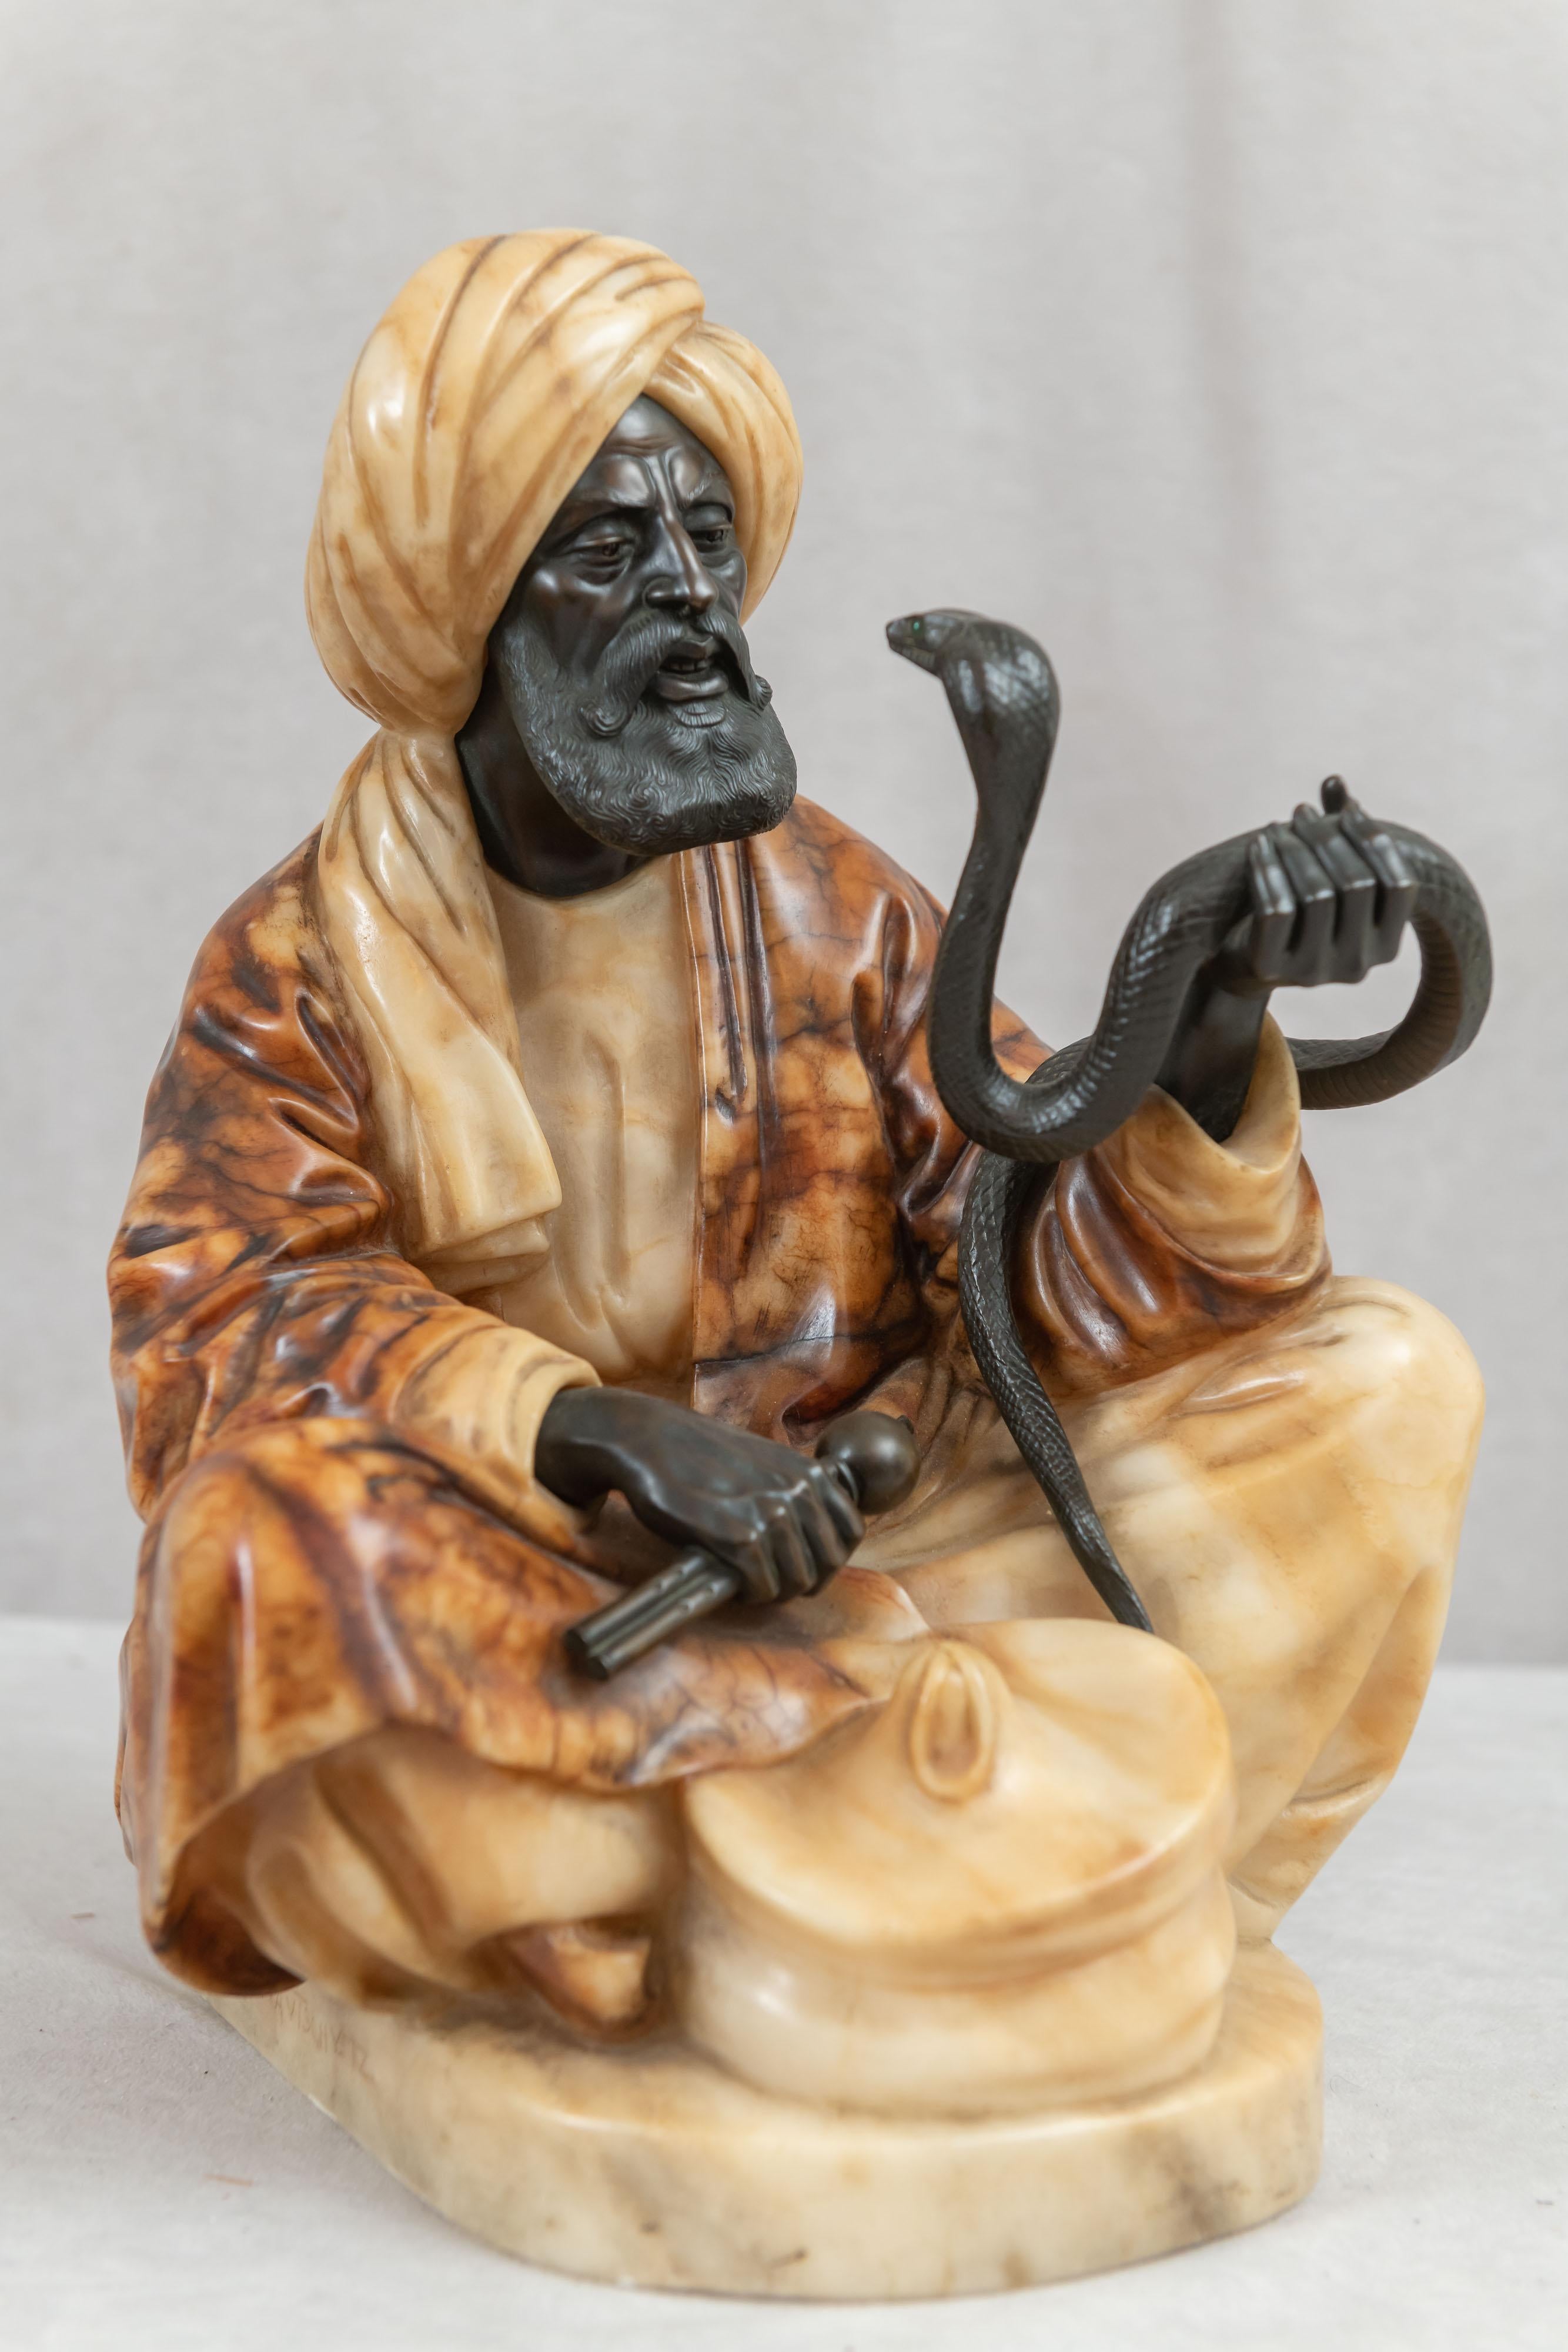 This Orientalist figure is about as lifelike as you will ever see in bronze. The expression on his face, his detailed hands and beard are all cast with an incredible attention to detail. The snake is just as well modeled to include his, ever so